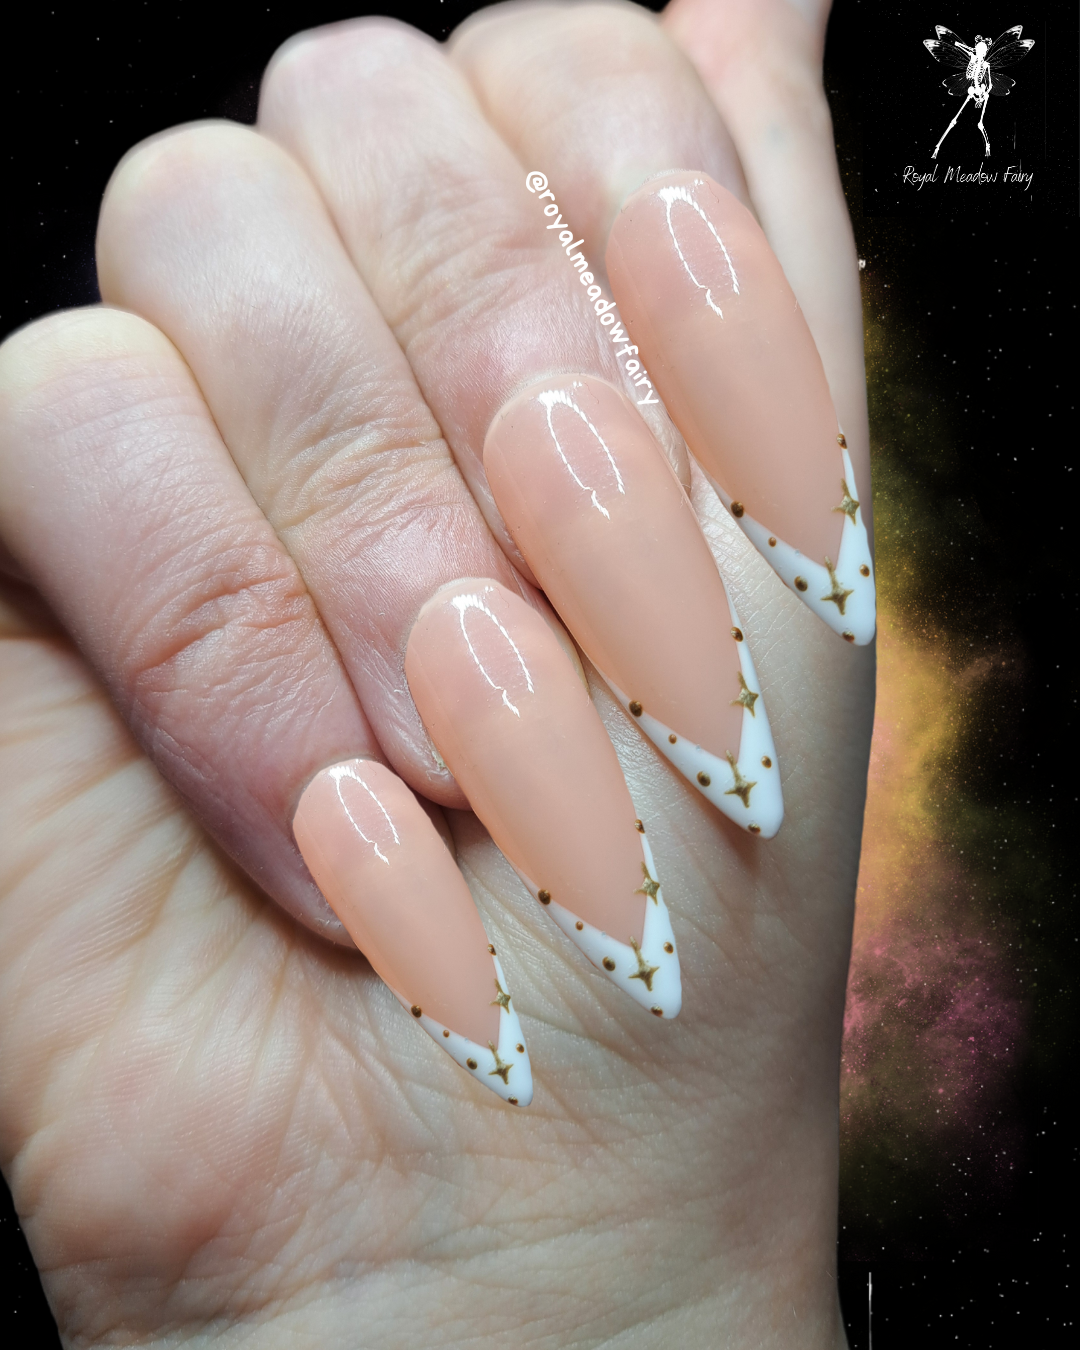 nude and wite french tip press on nails with goldf nail art design of dots and stars 